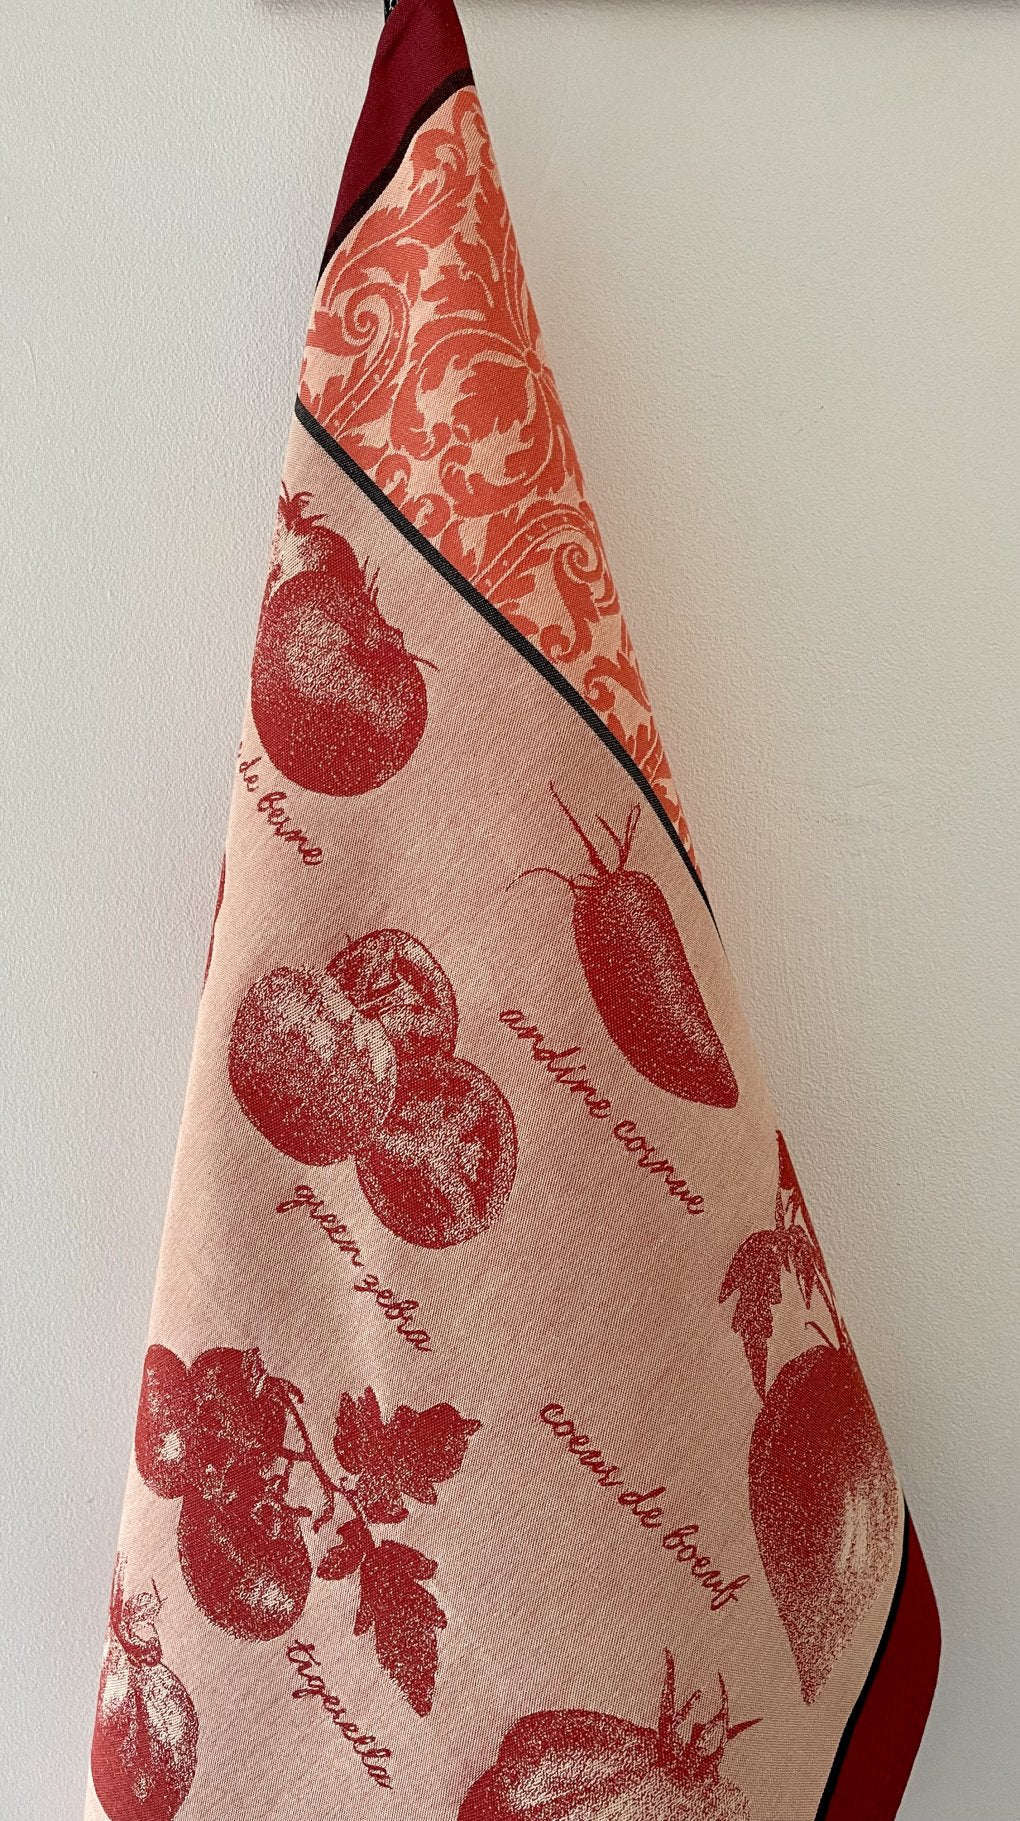 Jacquard Francais "Tomatoes" (Red), Woven cotton tea towel. Made in France